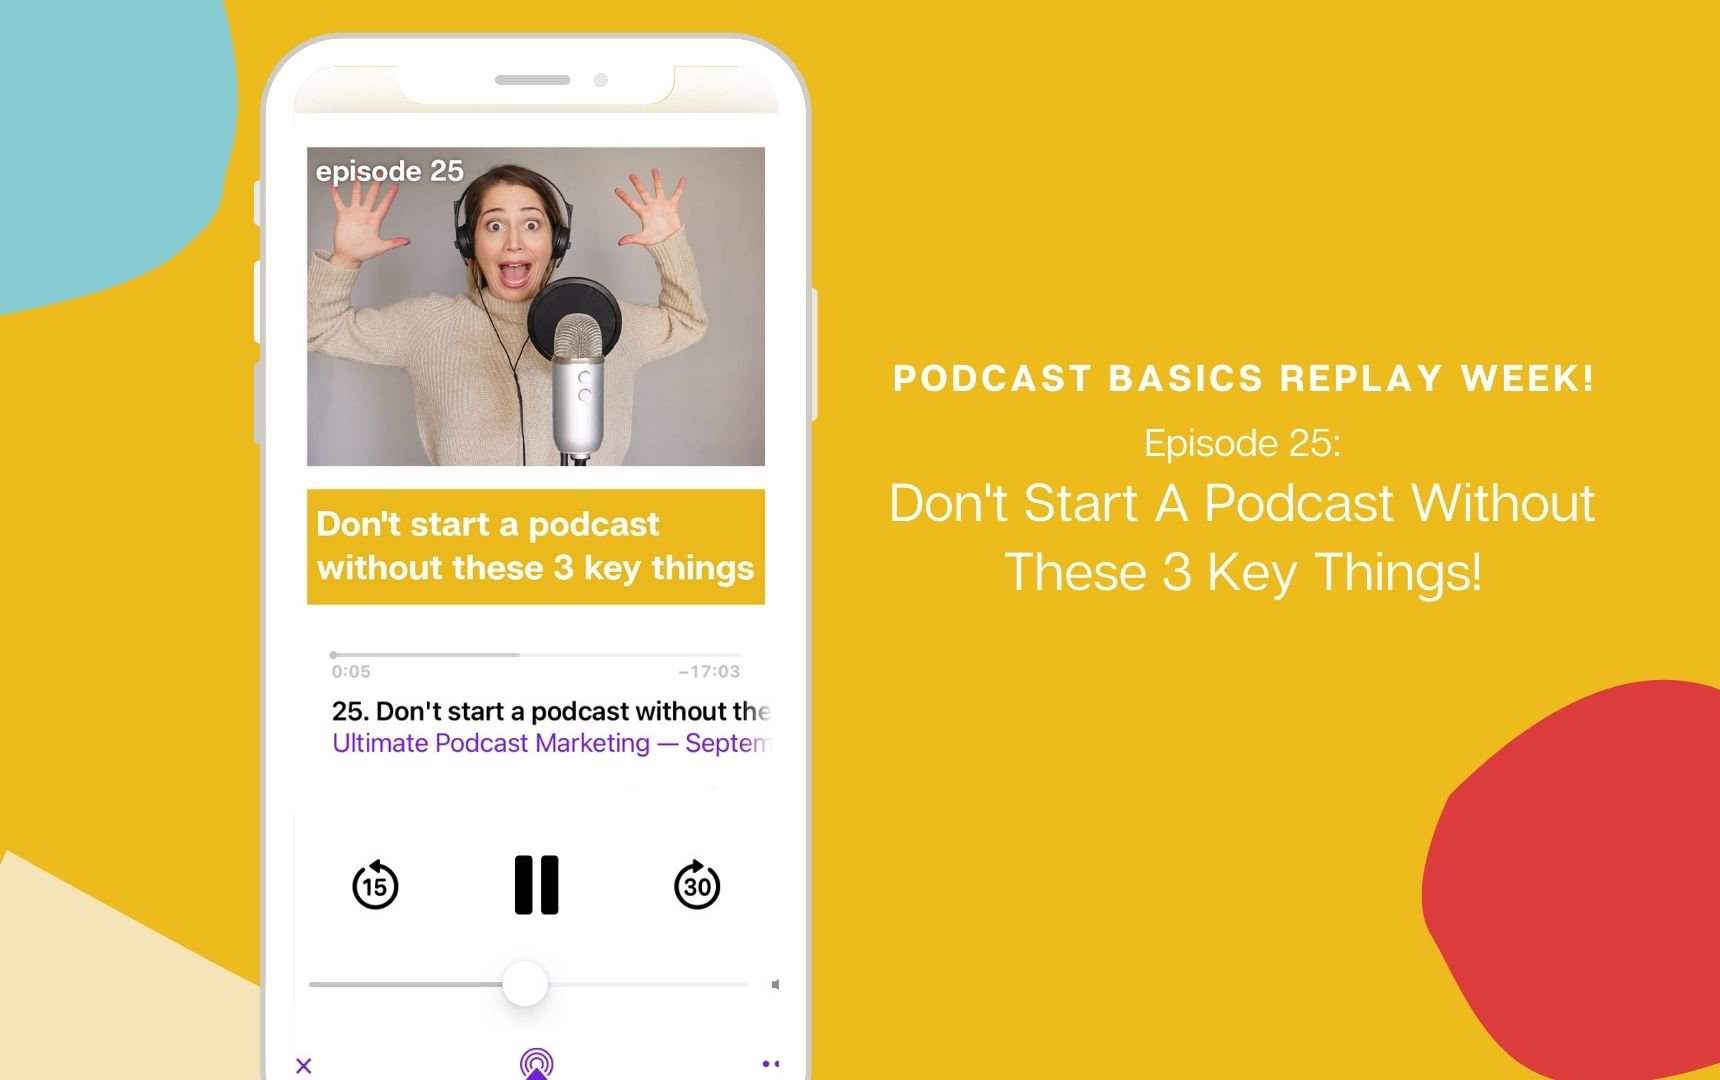 Replay: Don't start a podcast without these 3 key things